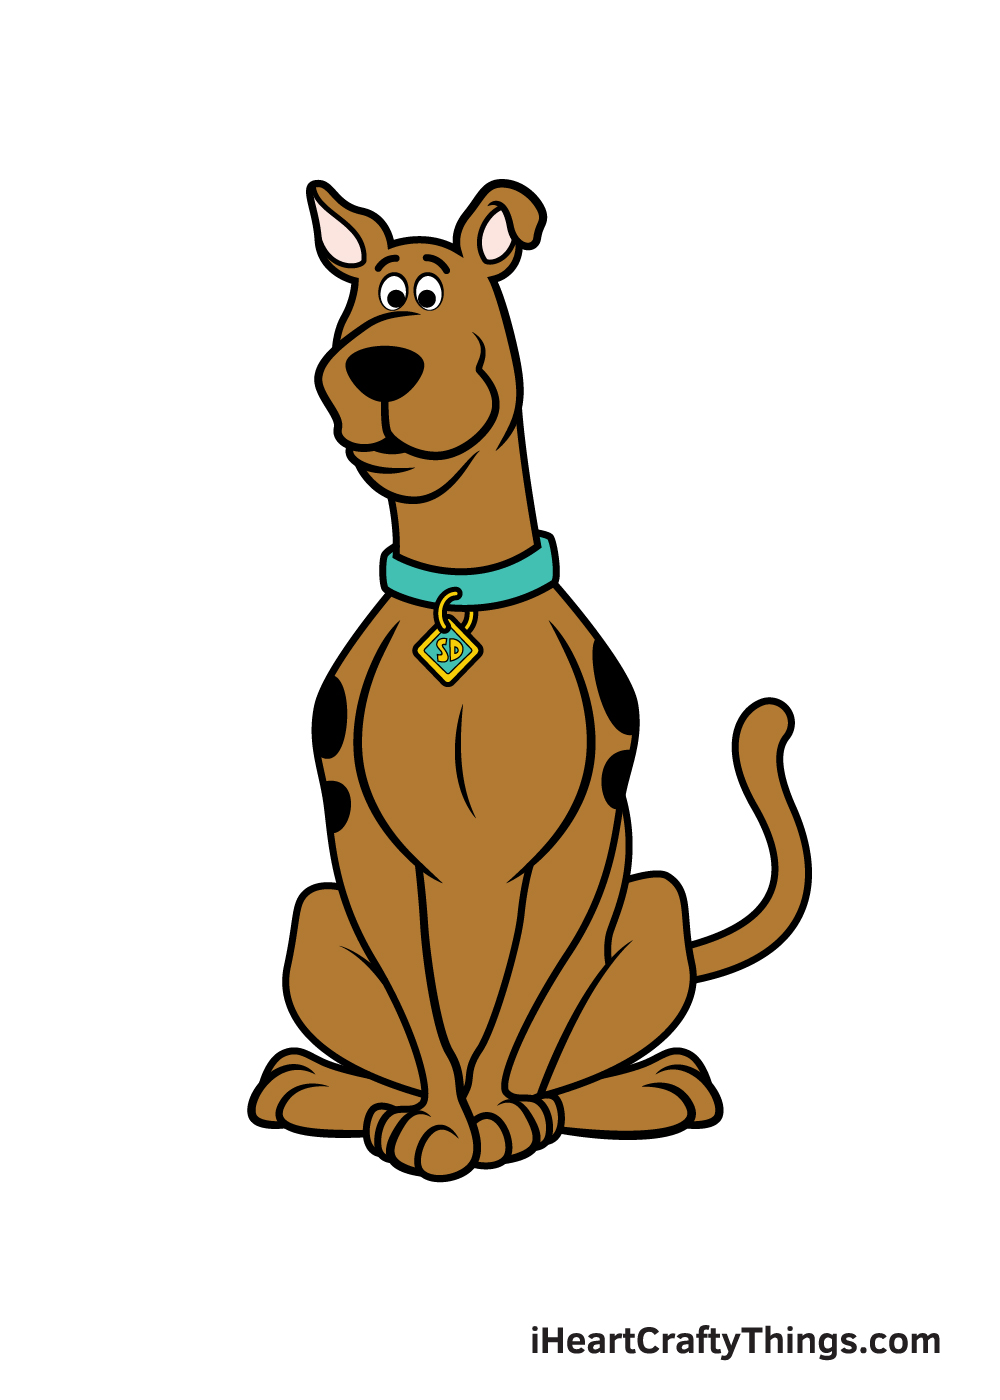 ScoobyDoo Drawing How To Draw ScoobyDoo Step By Step